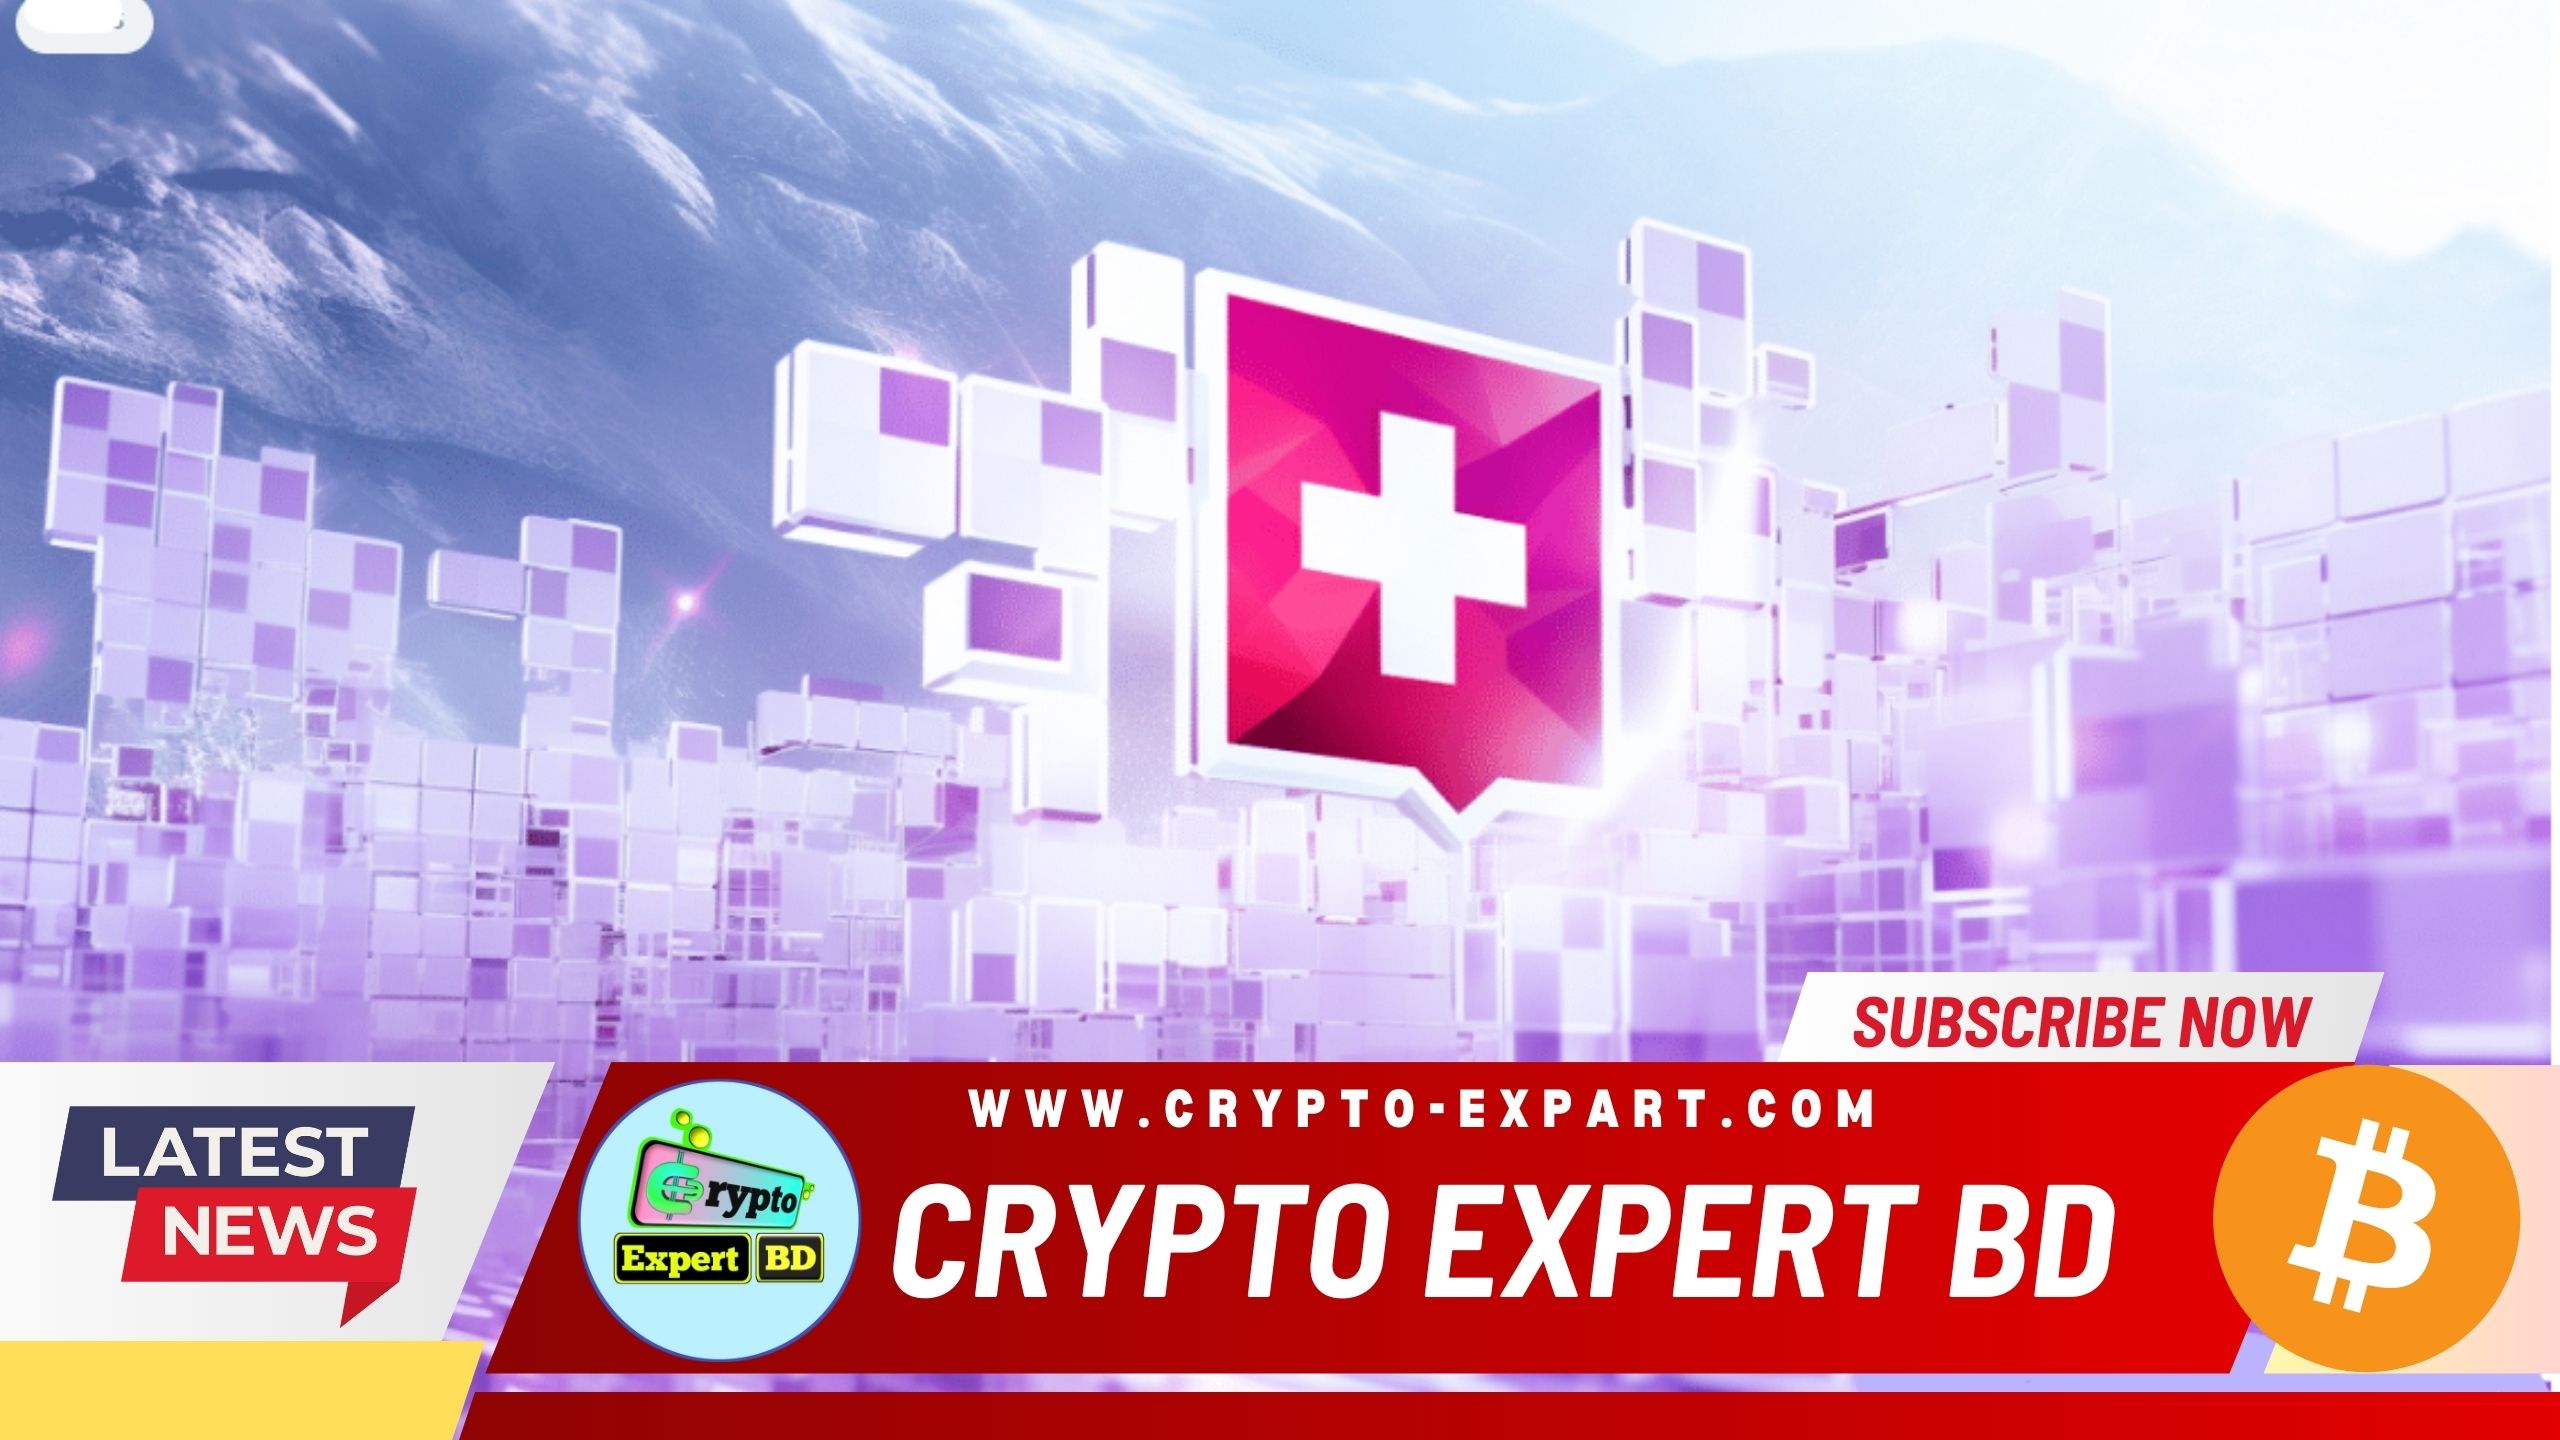 Crypto Valley in Switzerland Experiences Remarkable Growth in Web3 and Blockchain Ecosystem